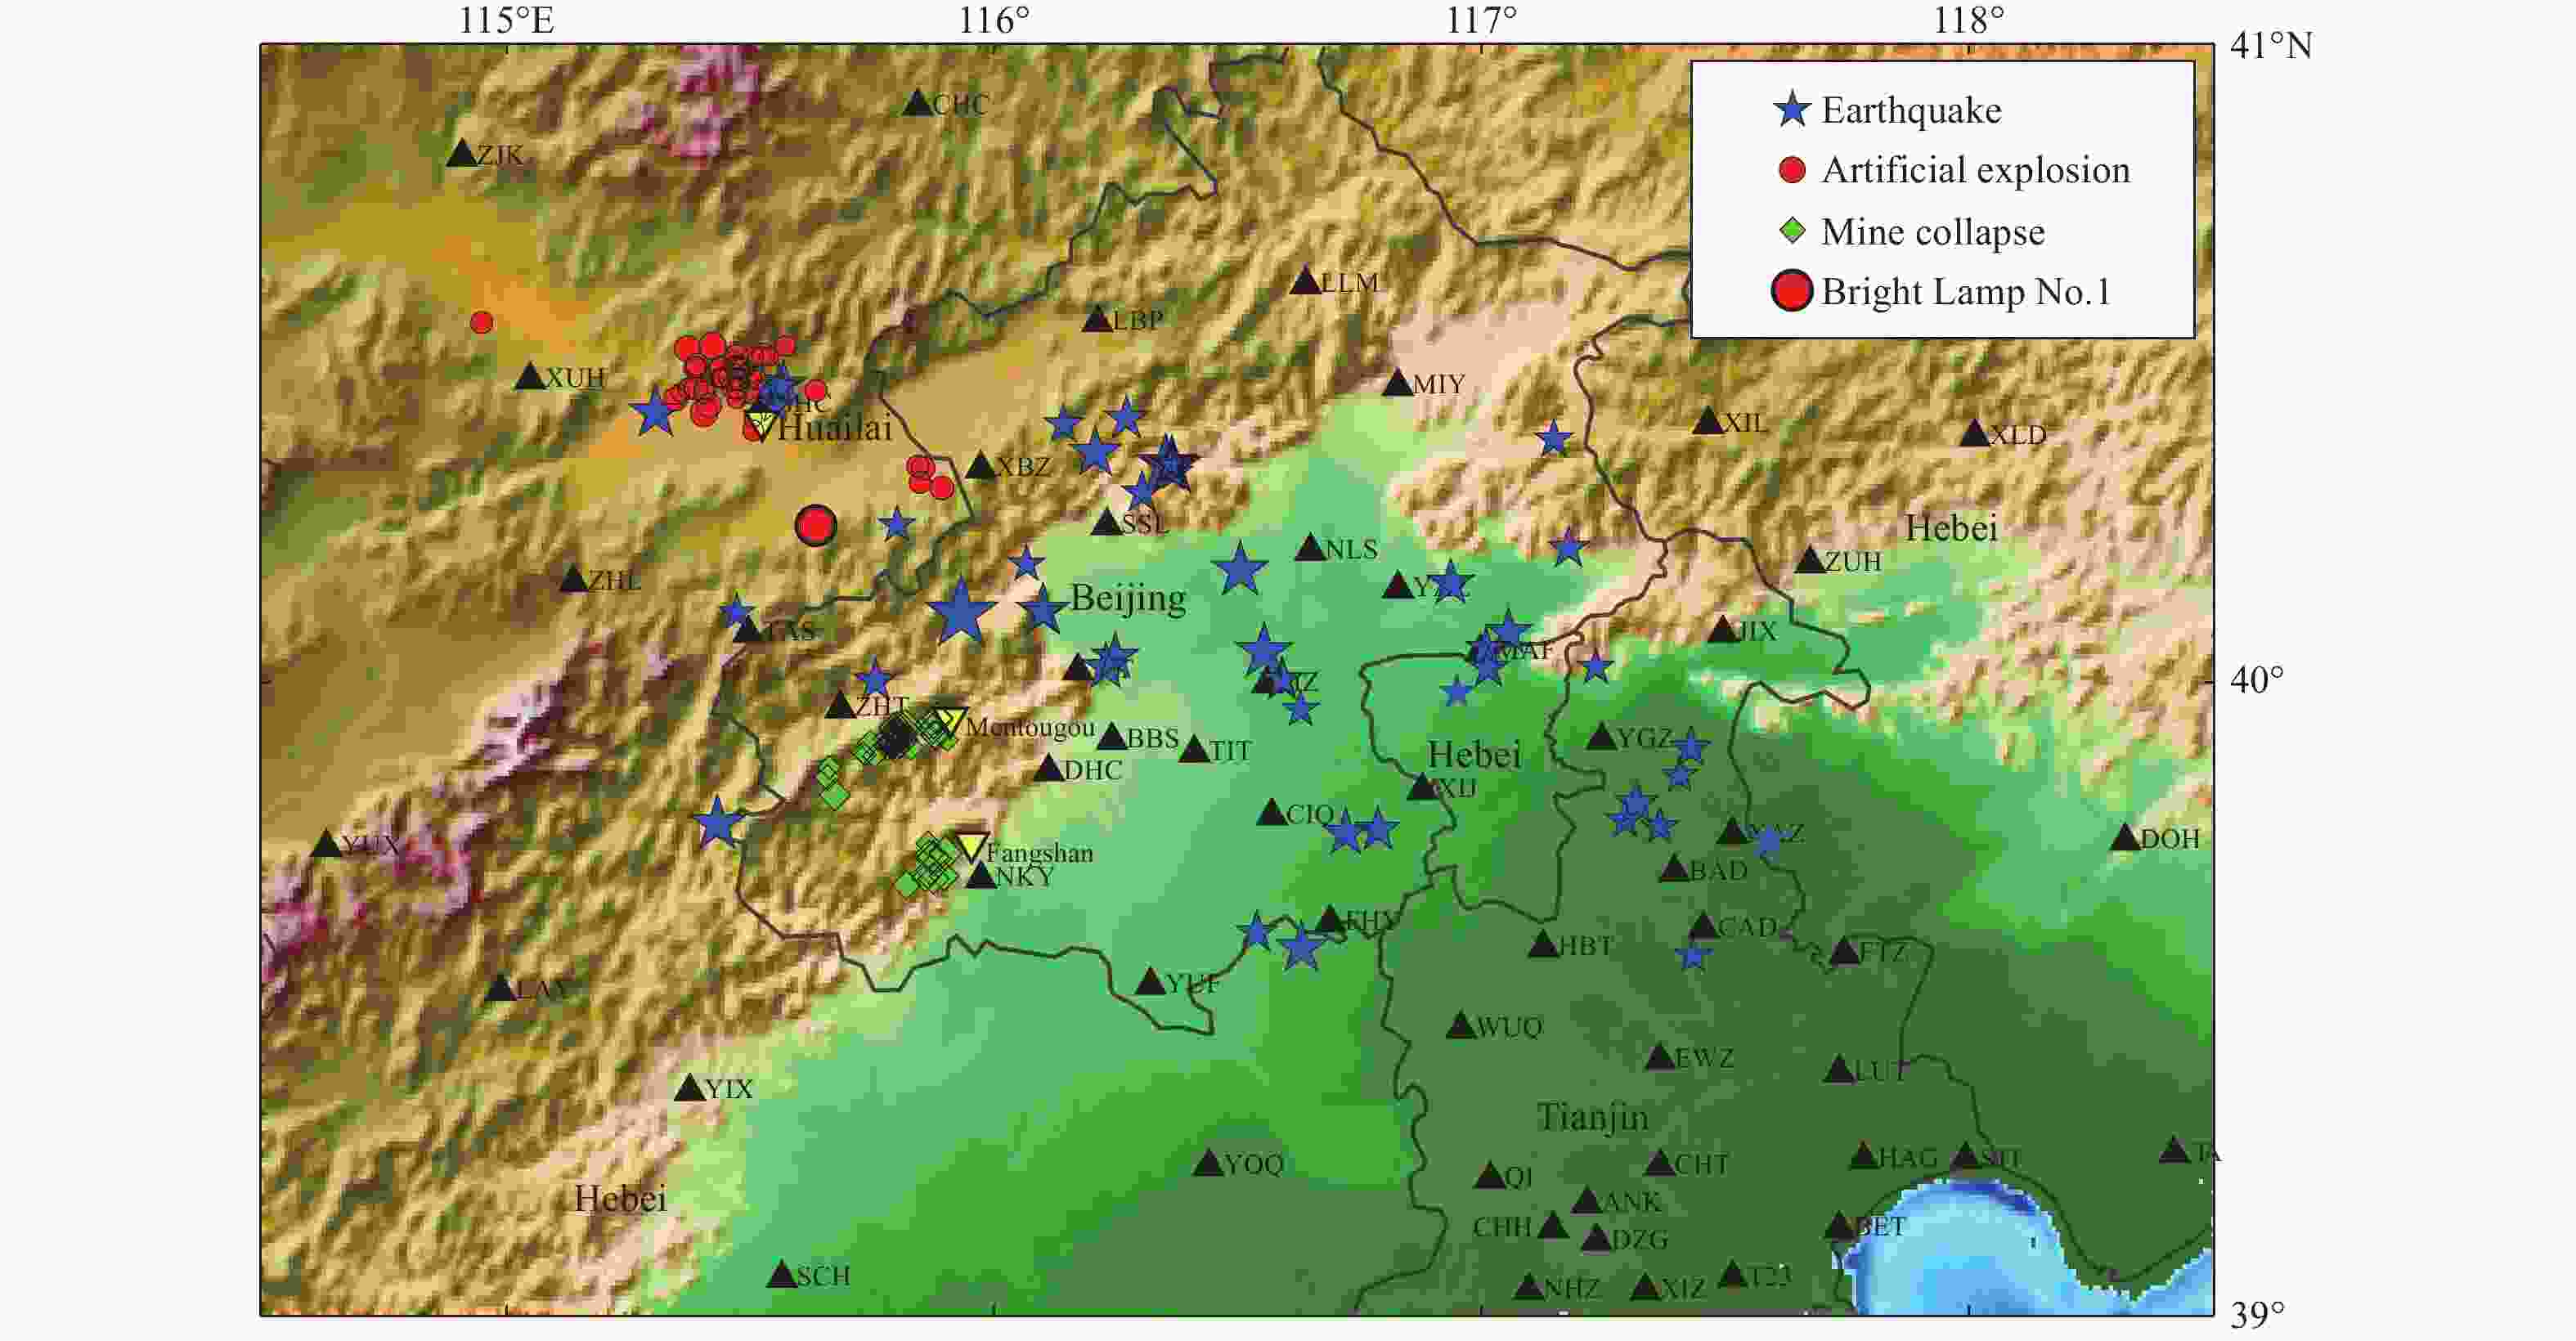 Features of different types of seismic events in China's Capital 